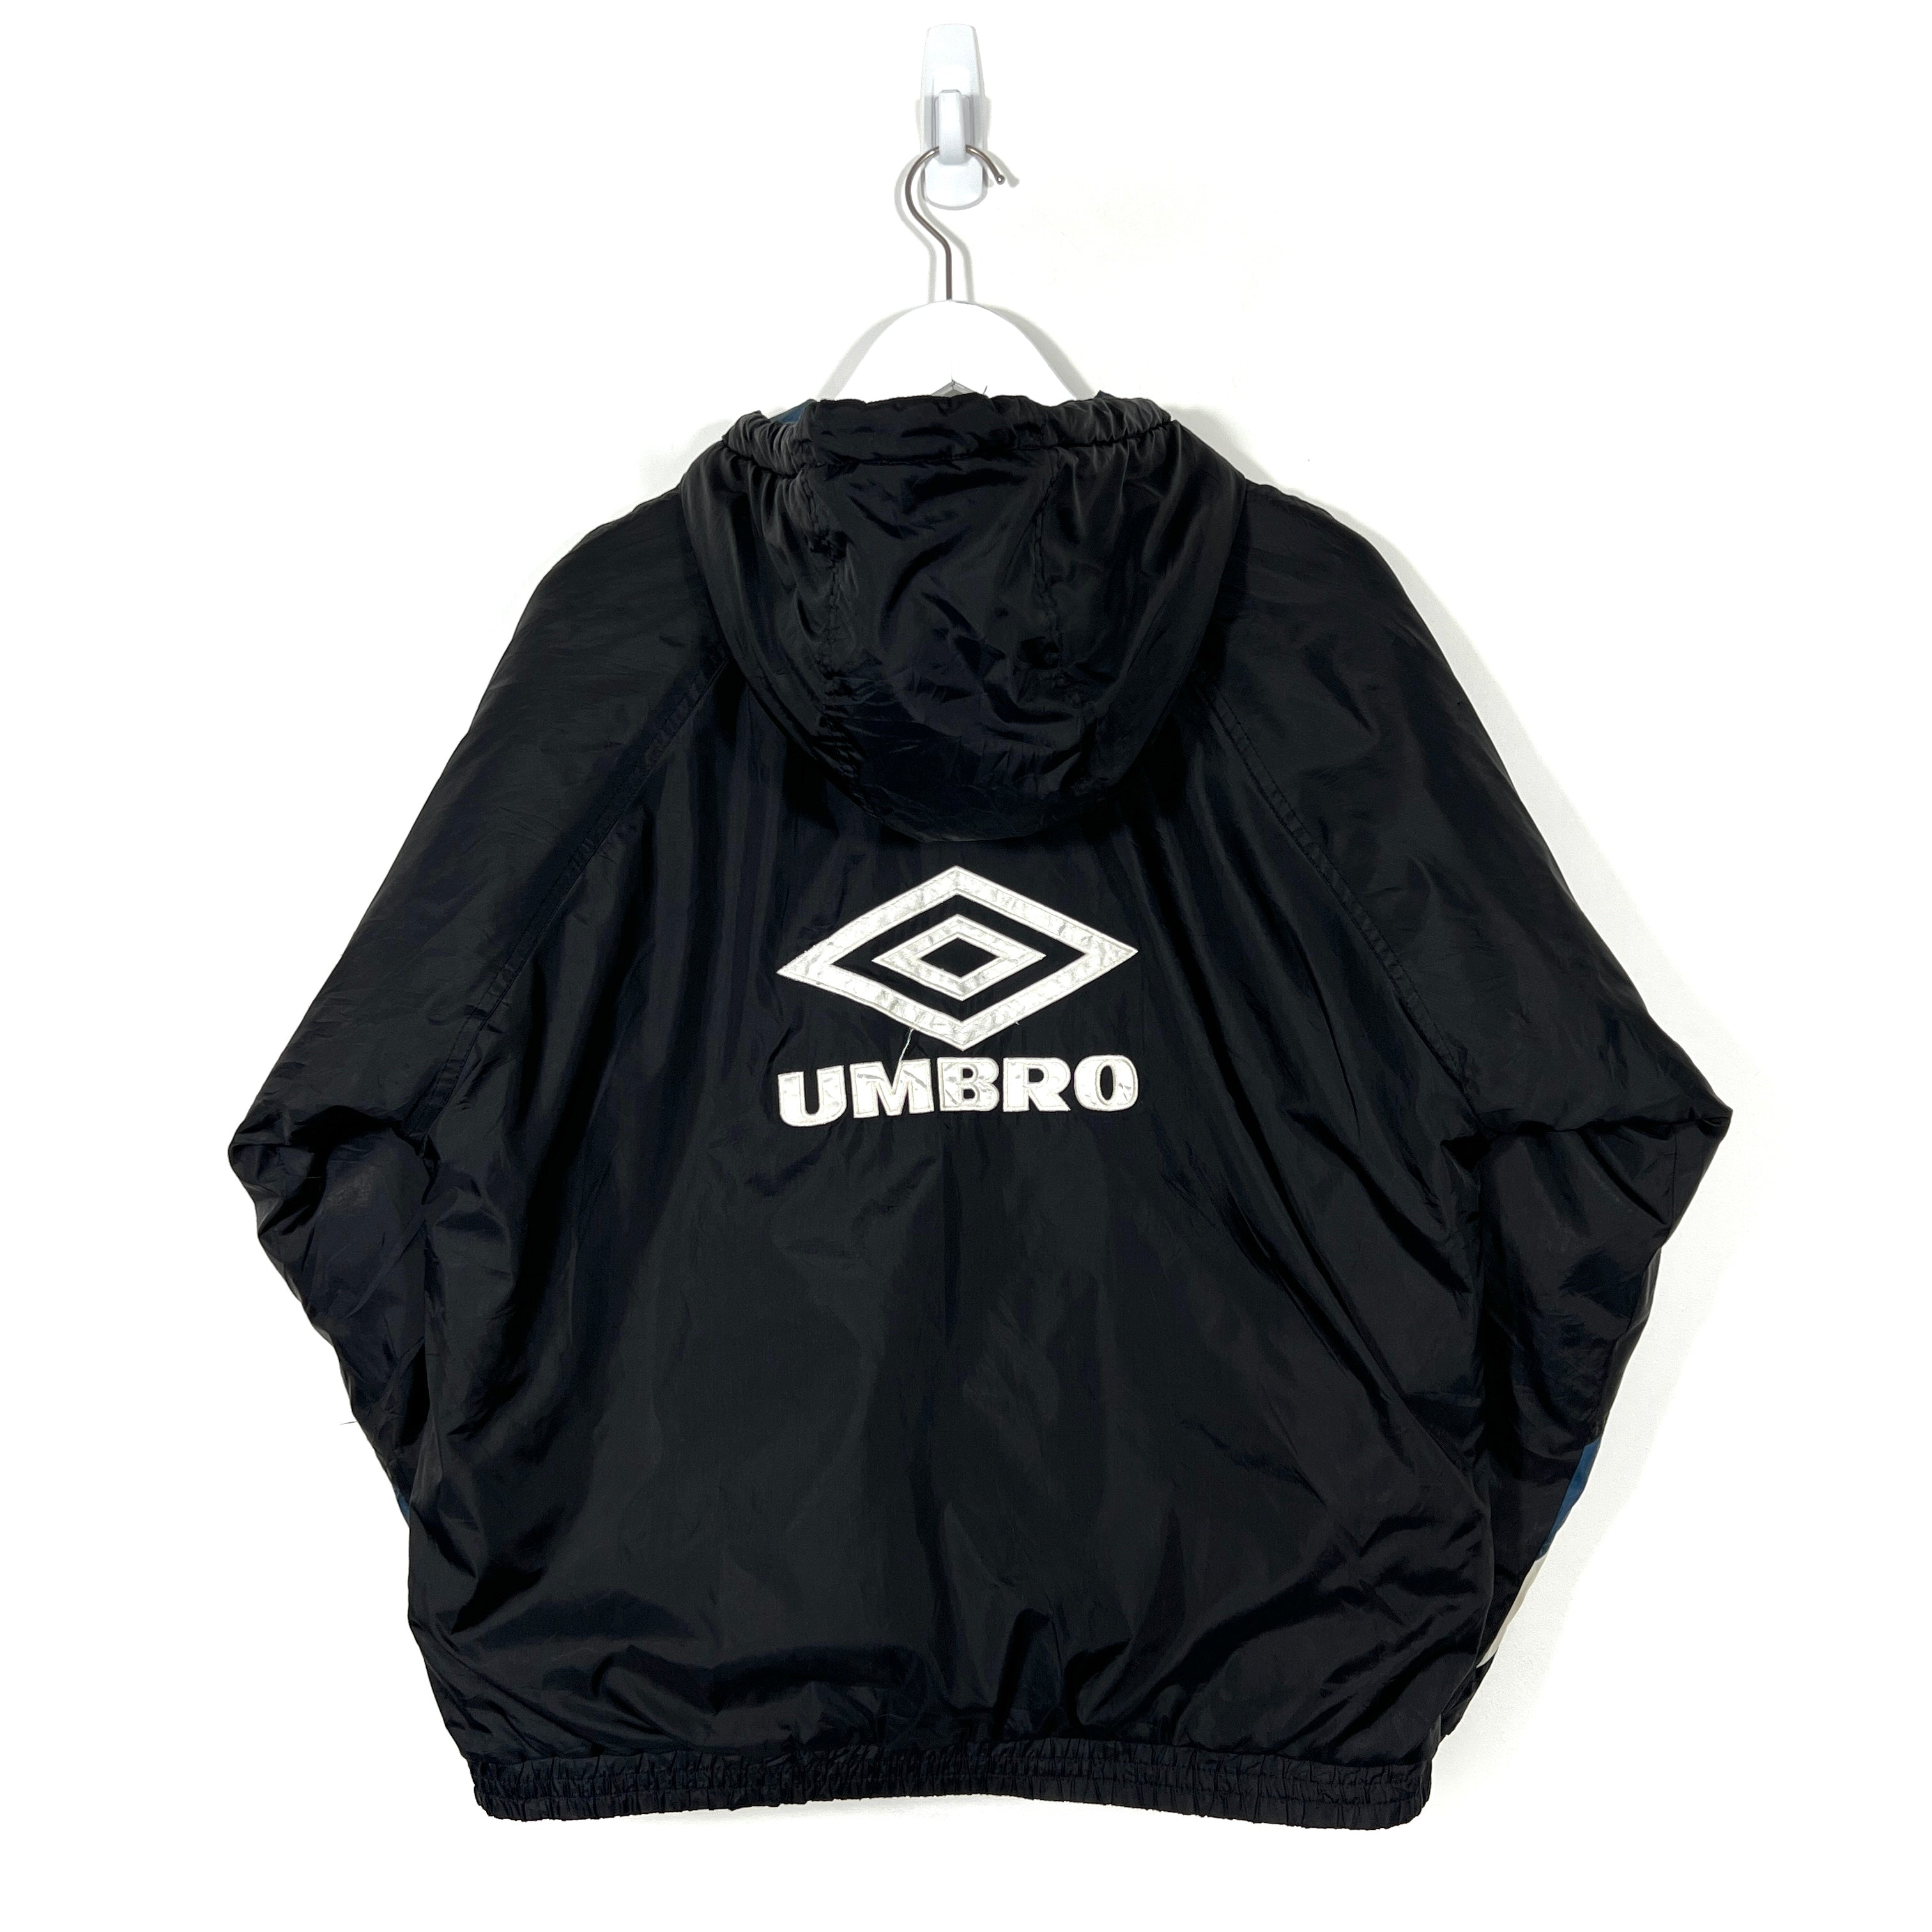 Vintage Umbro Reversible Insulated Jacket - Men's Small